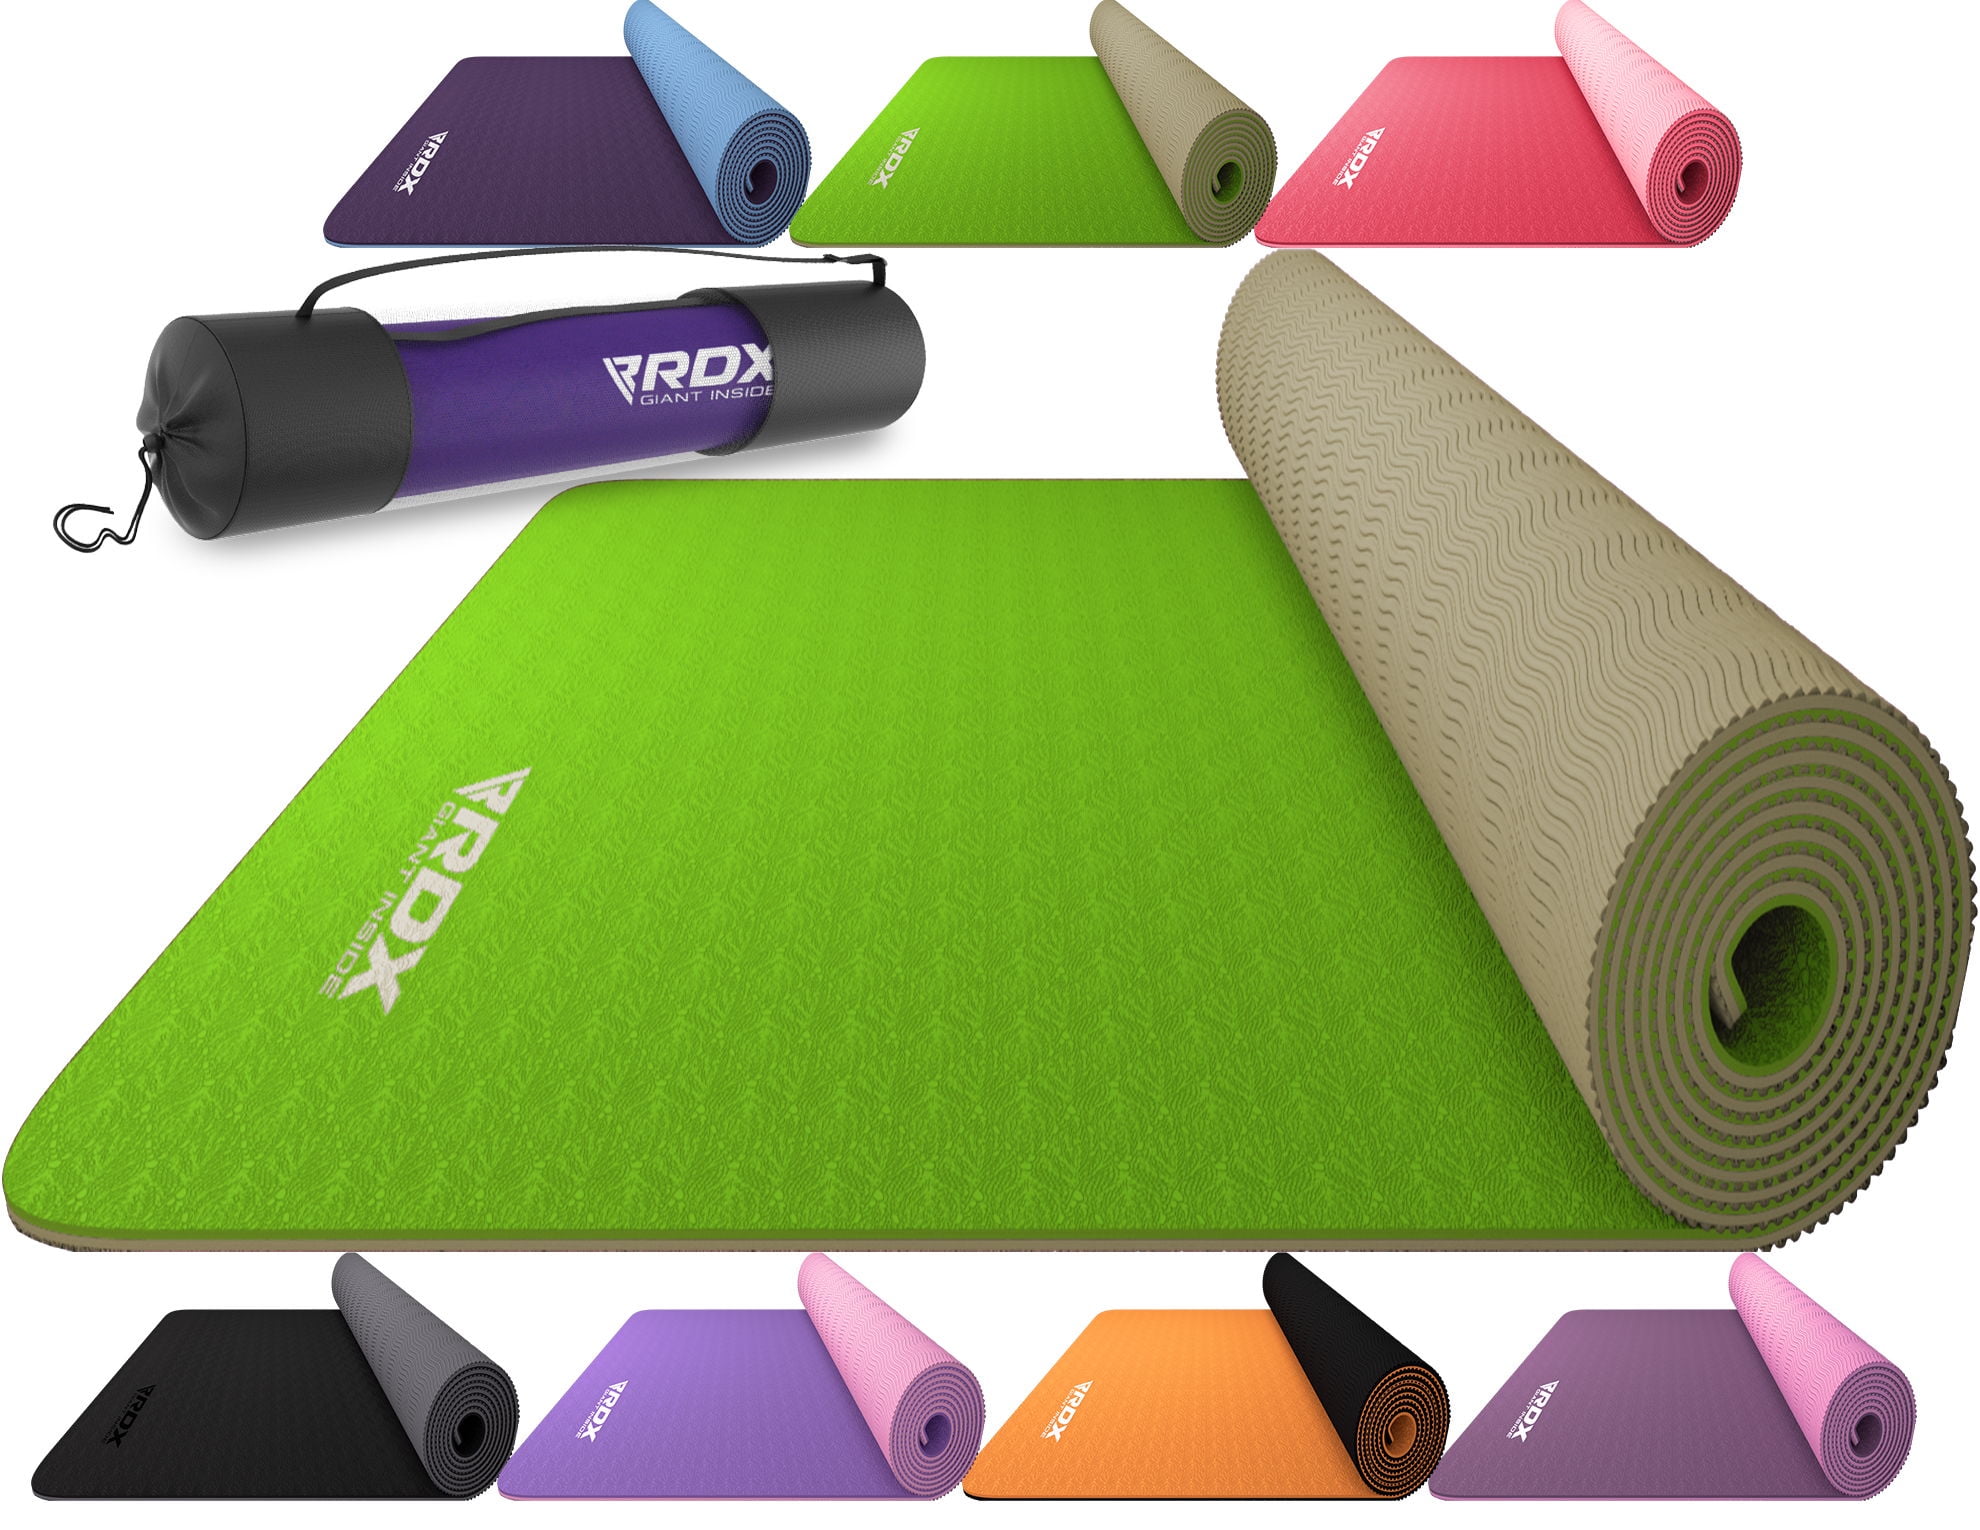 Eco Friendly Non Slip Mats for Men Women Reach ROHS Certified Home Gym Fitness Workout Exercise Pilates Aerobic Planks 183 x 61 x 0.6CM RDX Yoga Mat TPE 6mm Thick with Straps and Carry Bag 